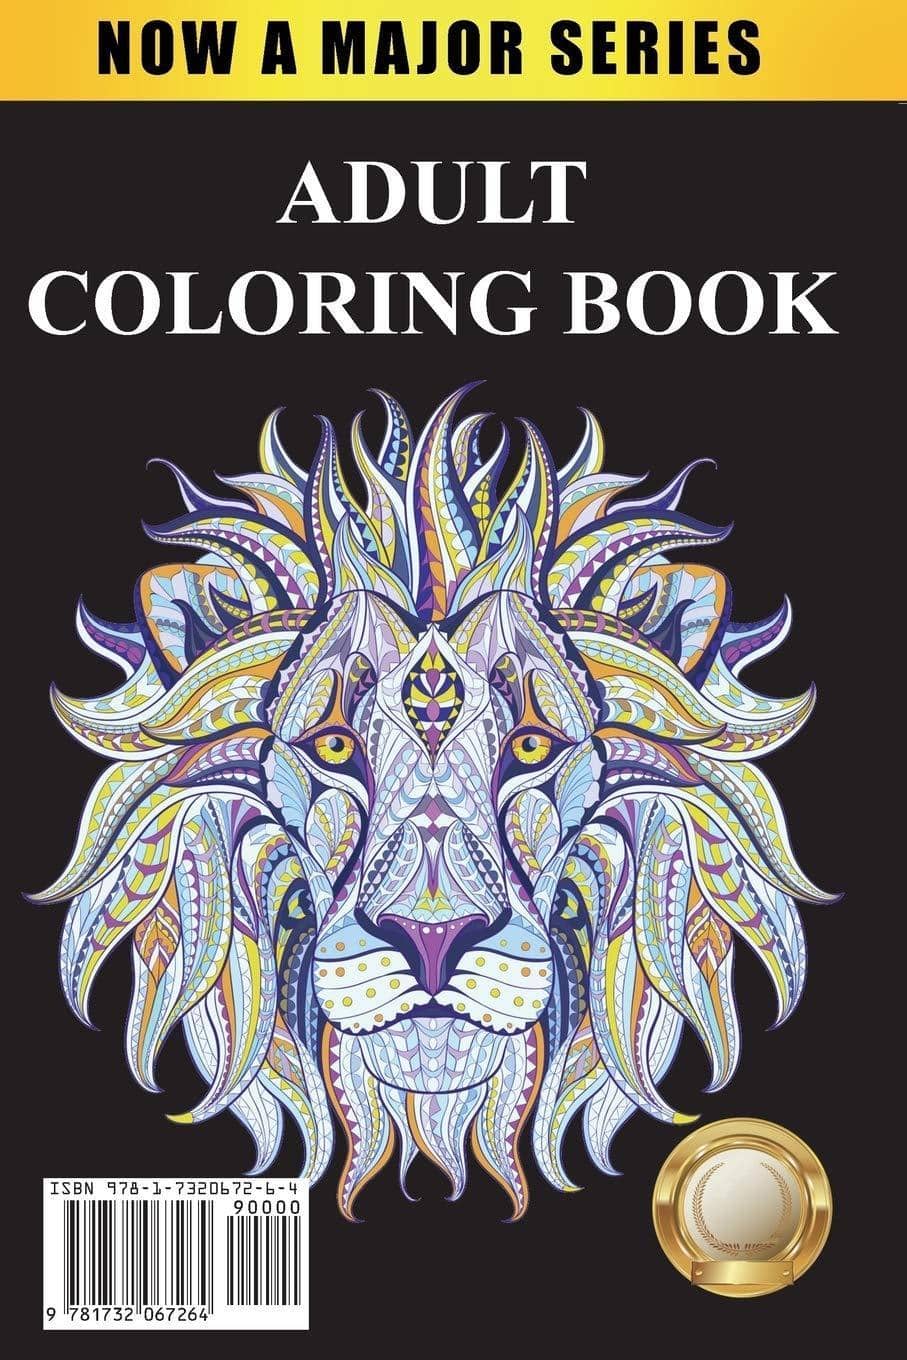 Adult Coloring Book: Largest Collection of Stress Relieving Patt - SureShot Books Publishing LLC